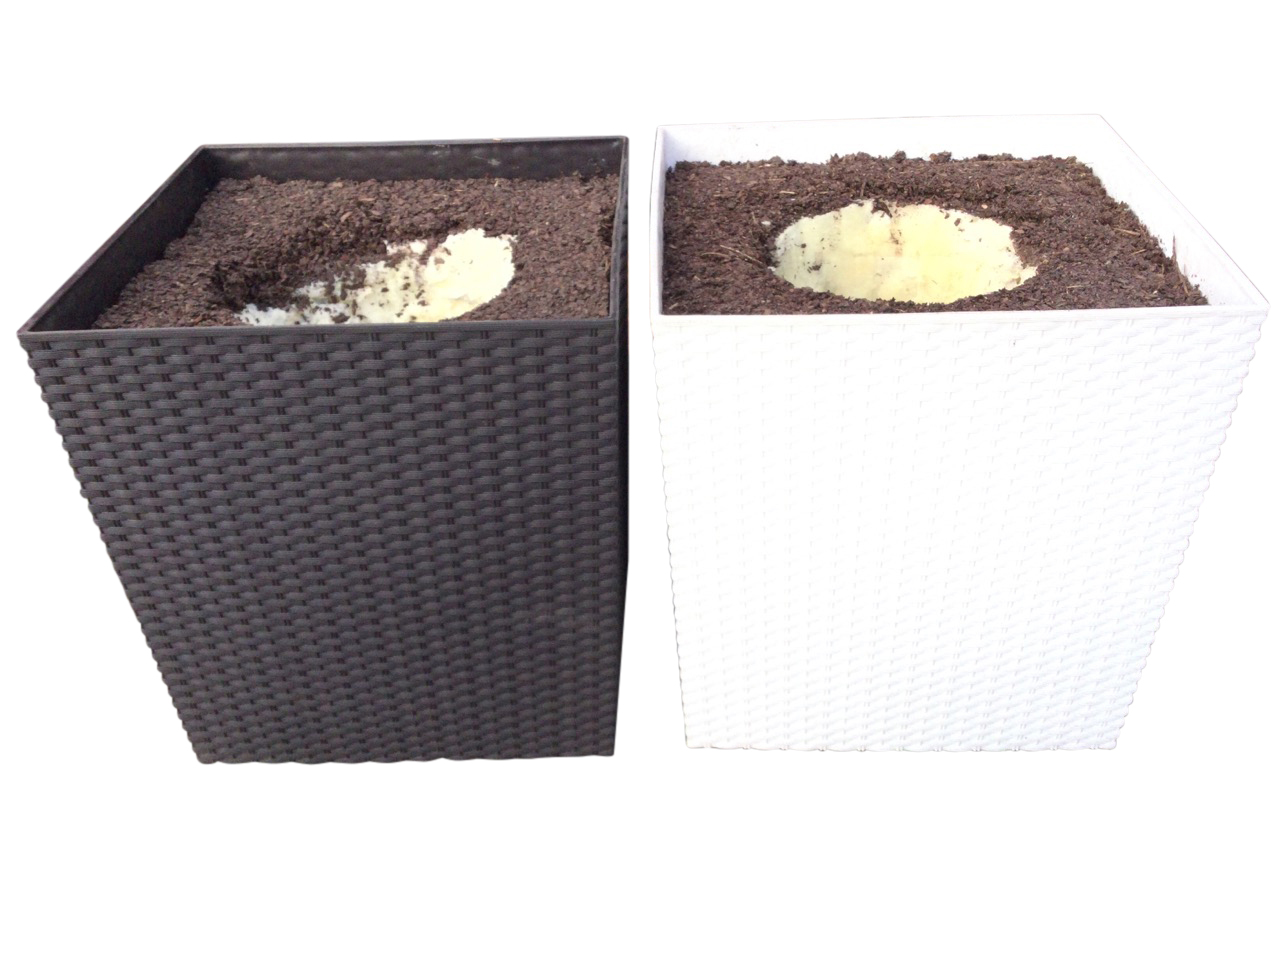 A pair of square tapering new garden tubs in a basketweave type finish - black & white. (15.5in x